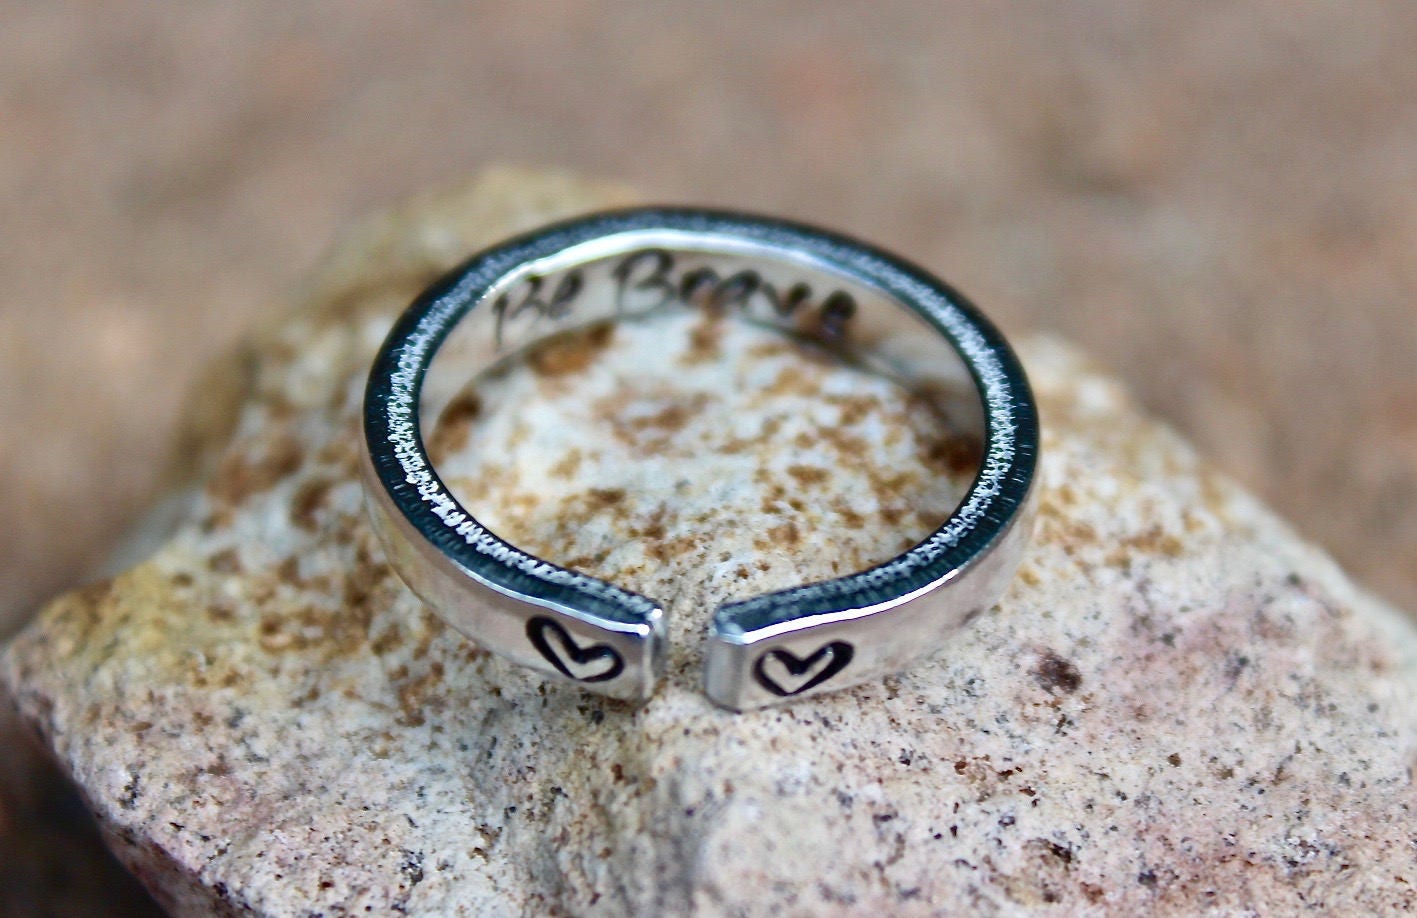 Be Brave Mantra Ring